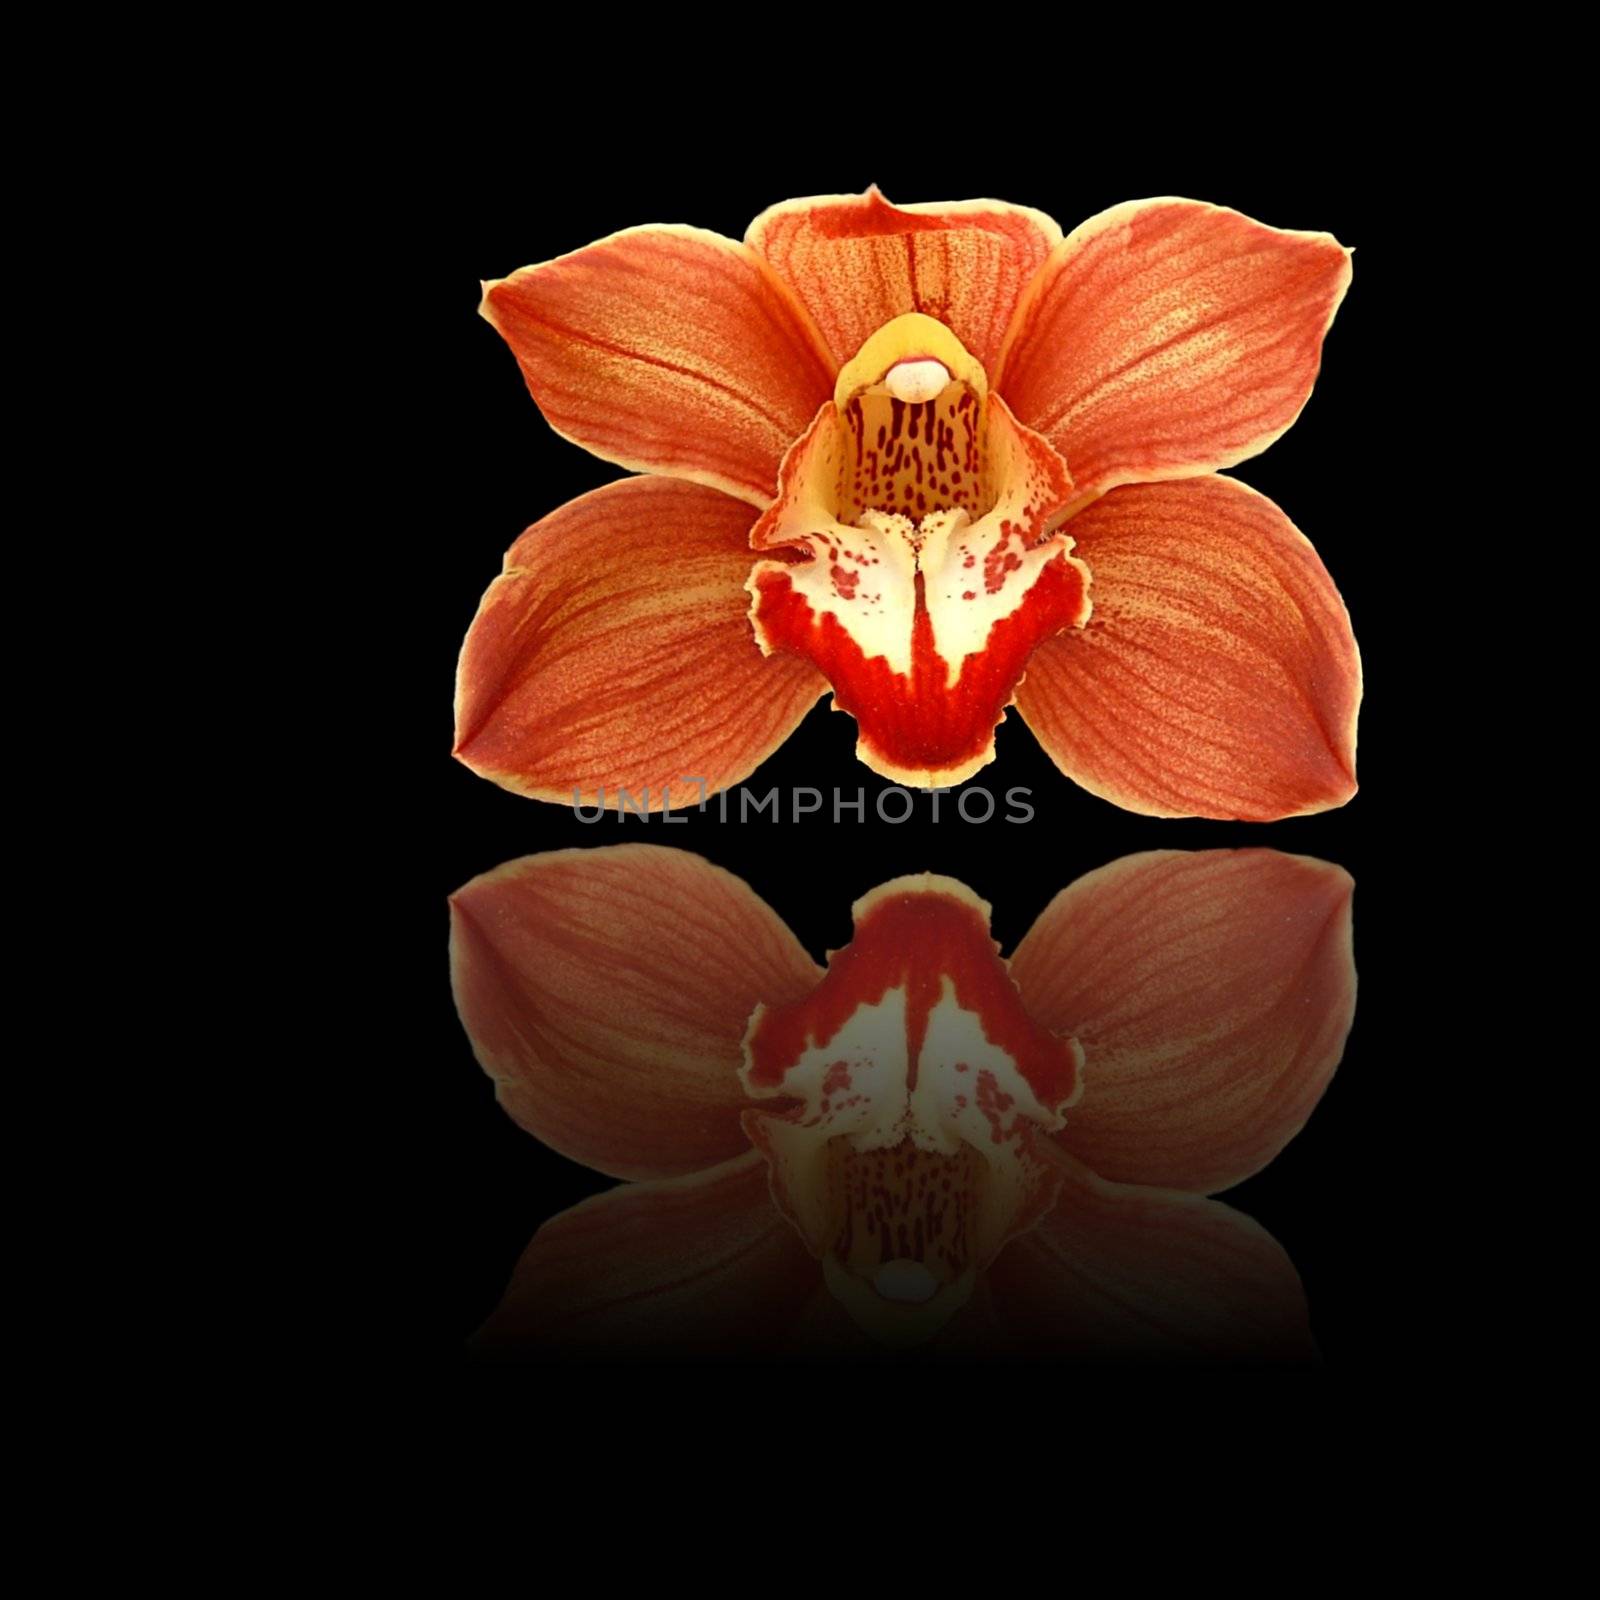 Red and orange orchid on black background with reflection.